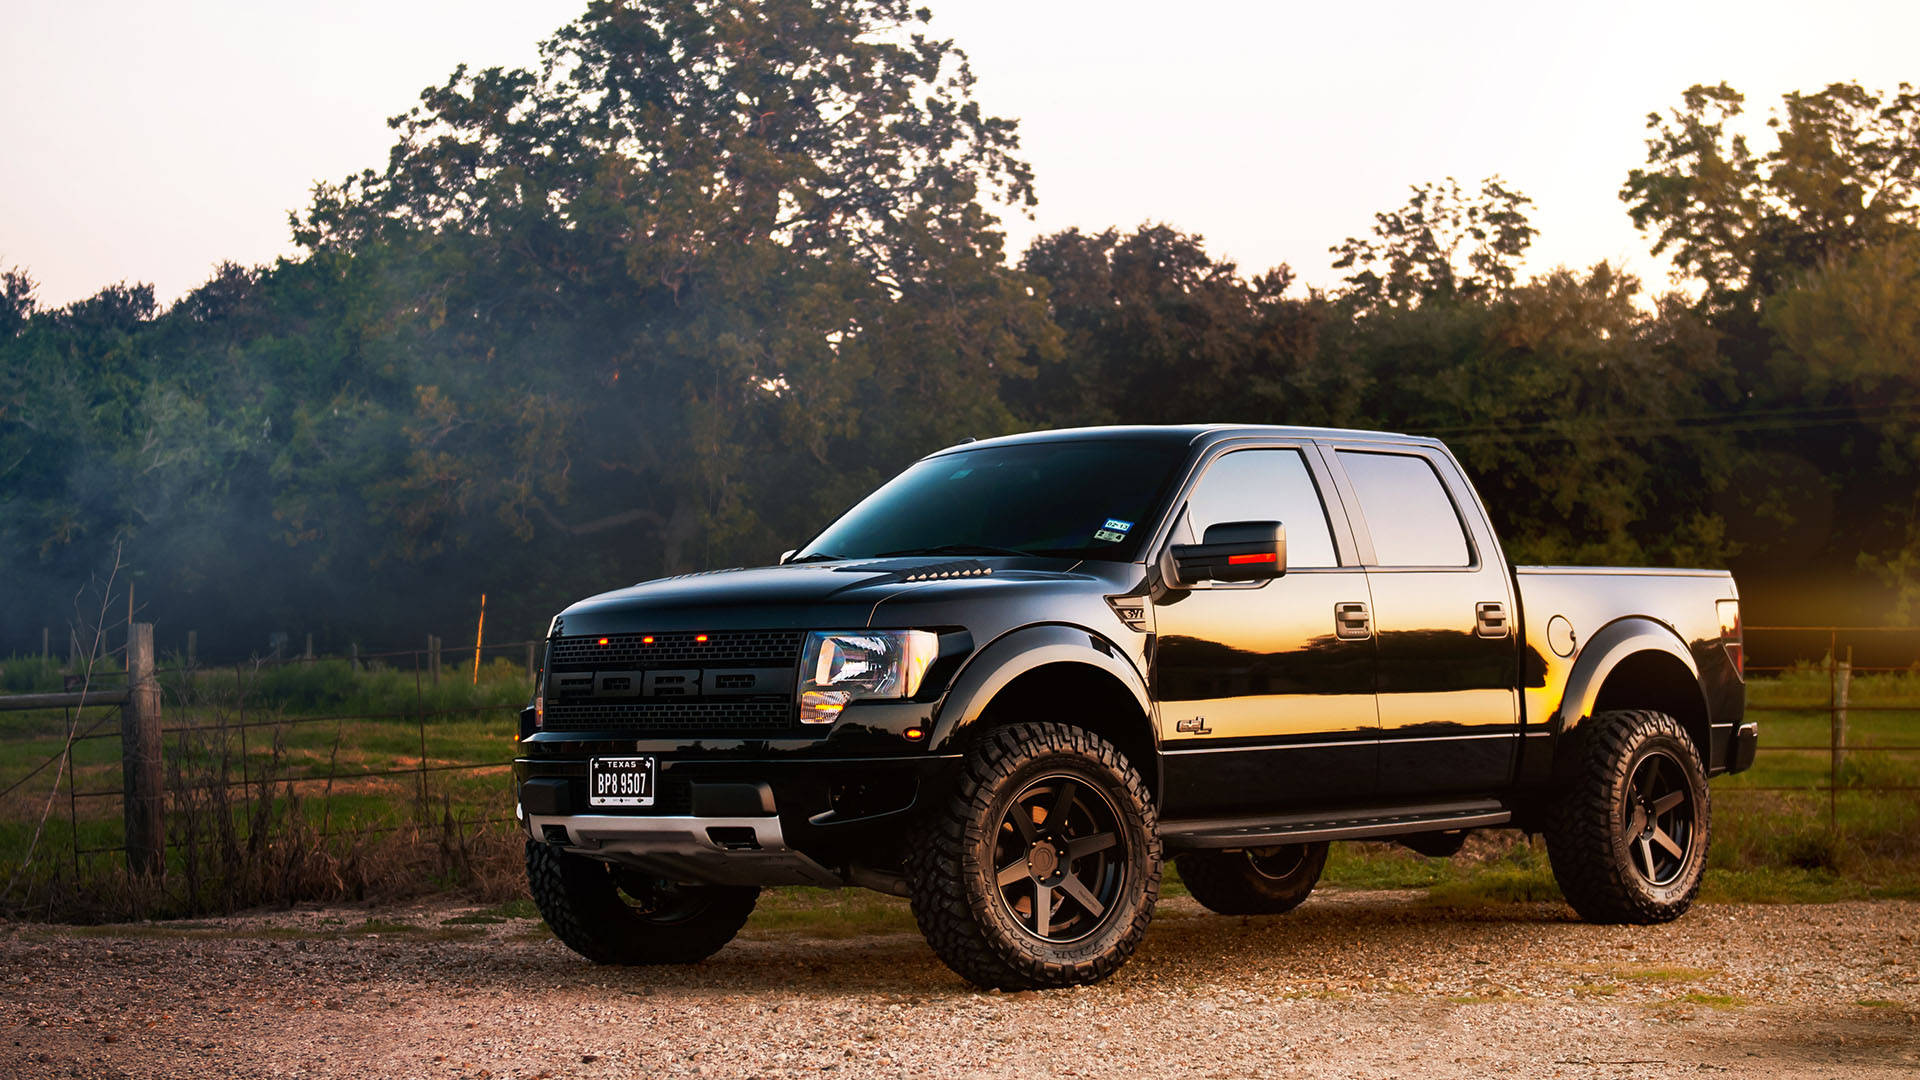 Ford Raptor In Shiny Black Paint